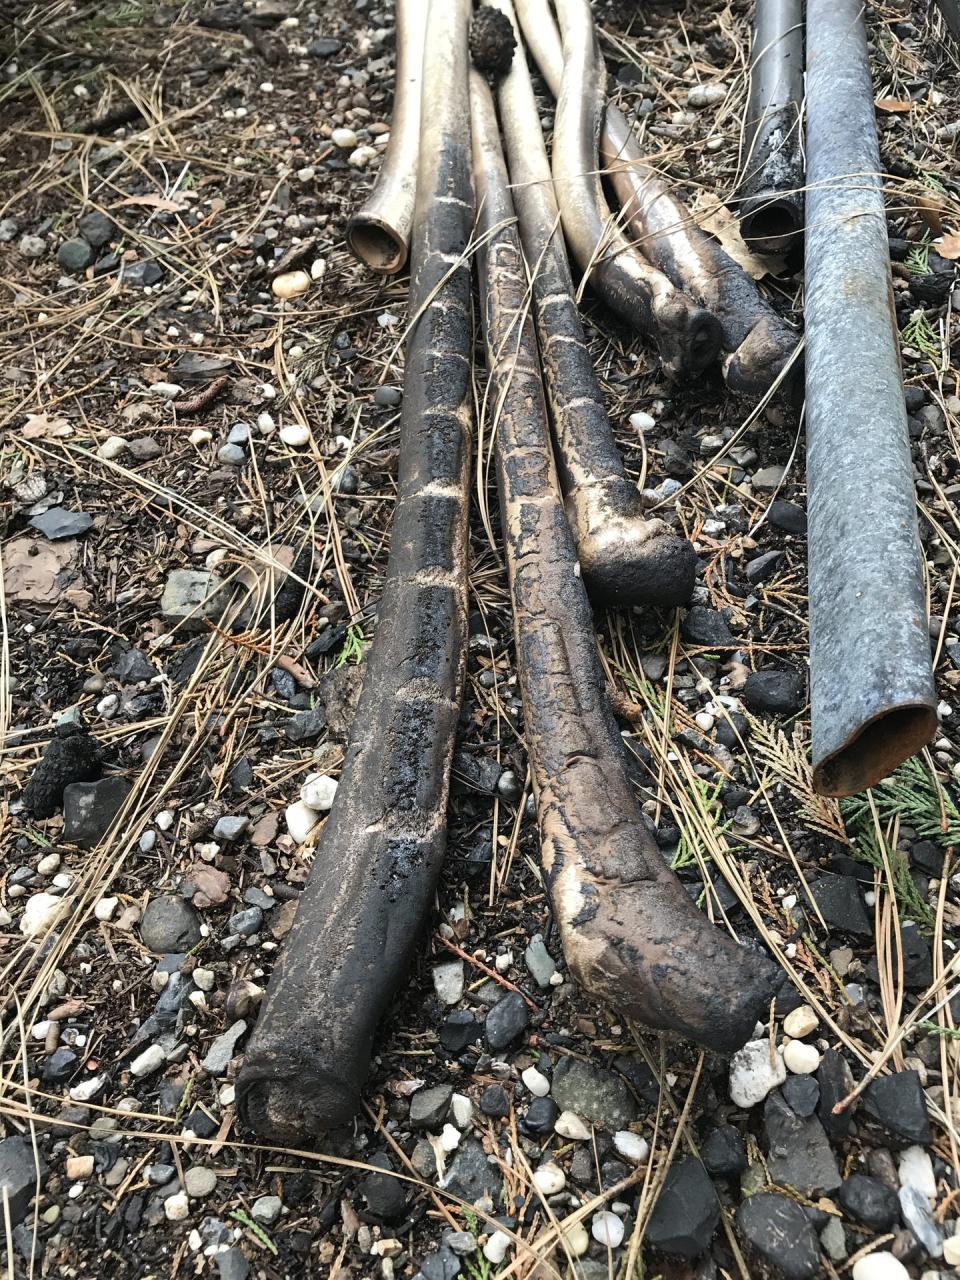 <span class="caption">Plastic pipes can be damaged by heat and fire contact.</span> <span class="attribution"><span class="source">Andrew Whelton, Purdue University</span></span>